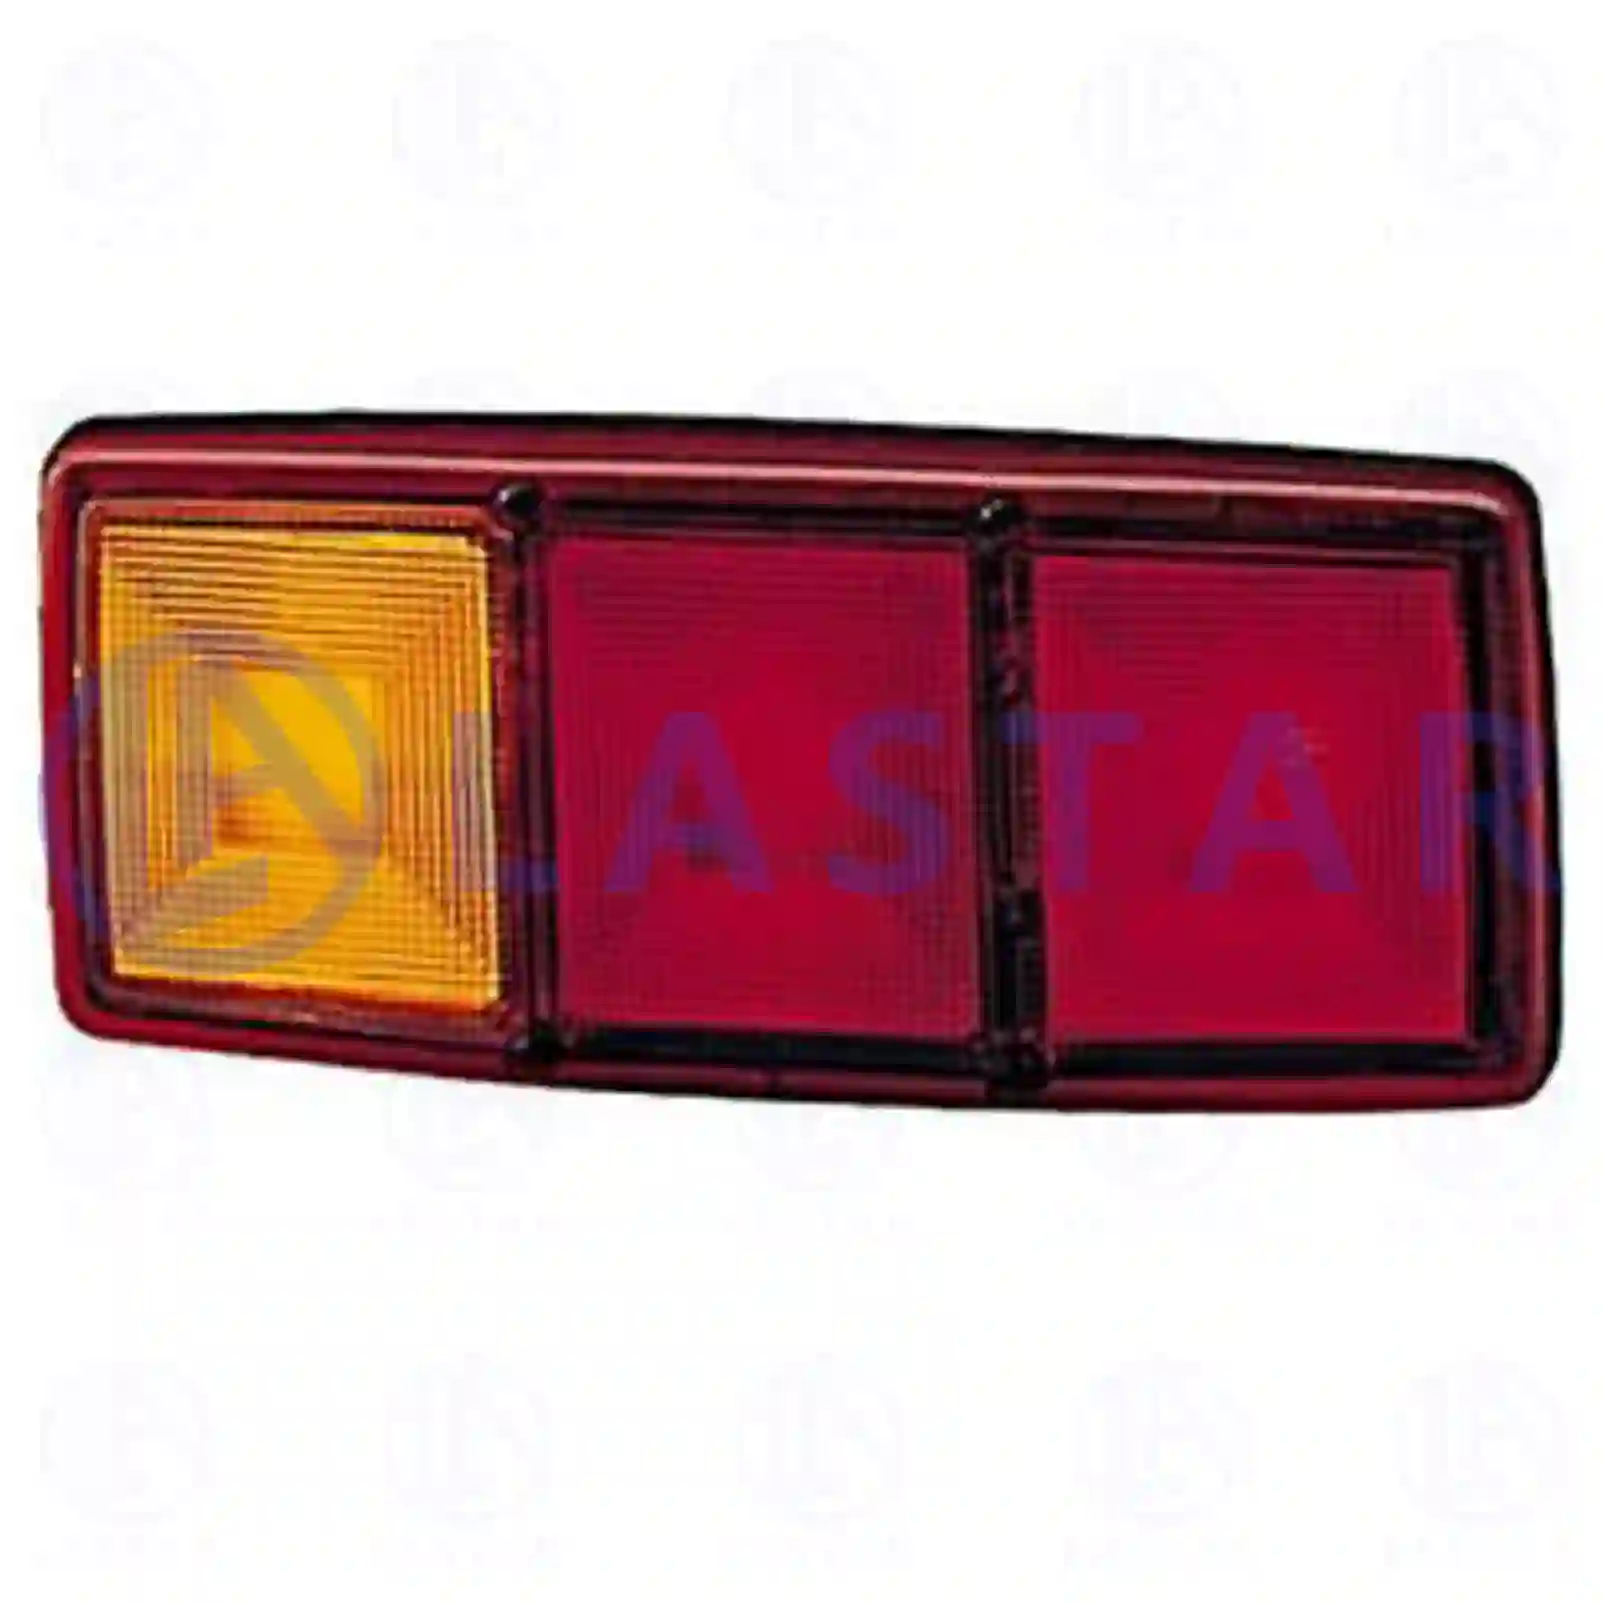 Tail lamp, right, without bulbs, 77711803, 0882012, 882012, LSX0117888, 41628726, 42013058, 77959, 77960, 0005405470, 0015446803, 0015448103, 0025440403, 000150323, 000150328, 20223974, 060552, 060553, 060565, 060566 ||  77711803 Lastar Spare Part | Truck Spare Parts, Auotomotive Spare Parts Tail lamp, right, without bulbs, 77711803, 0882012, 882012, LSX0117888, 41628726, 42013058, 77959, 77960, 0005405470, 0015446803, 0015448103, 0025440403, 000150323, 000150328, 20223974, 060552, 060553, 060565, 060566 ||  77711803 Lastar Spare Part | Truck Spare Parts, Auotomotive Spare Parts